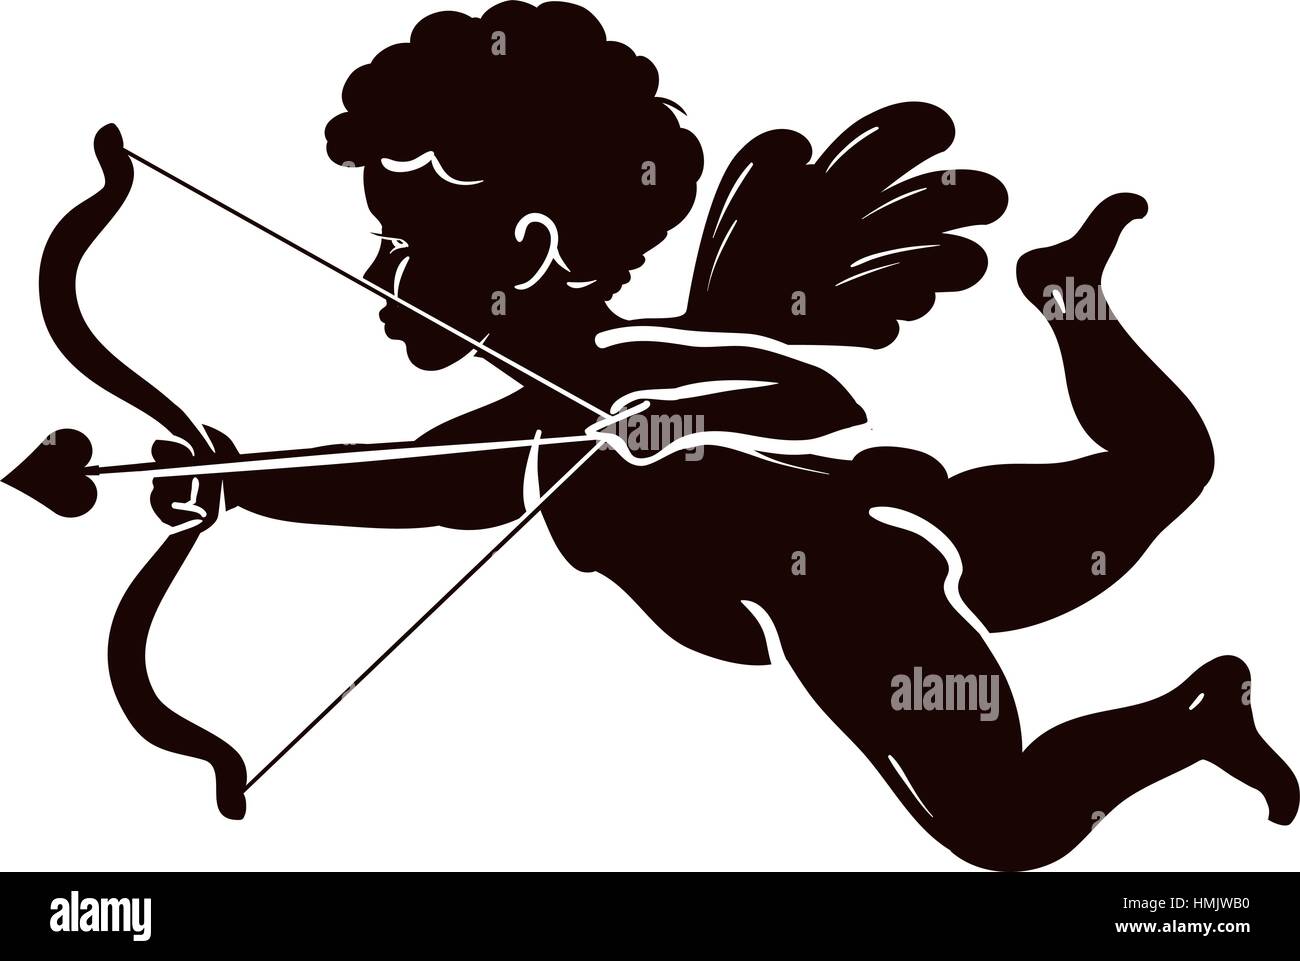 Silhouette angel, cupid or cherub with bow and arrow. Vector illustration isolated on white background Stock Vector